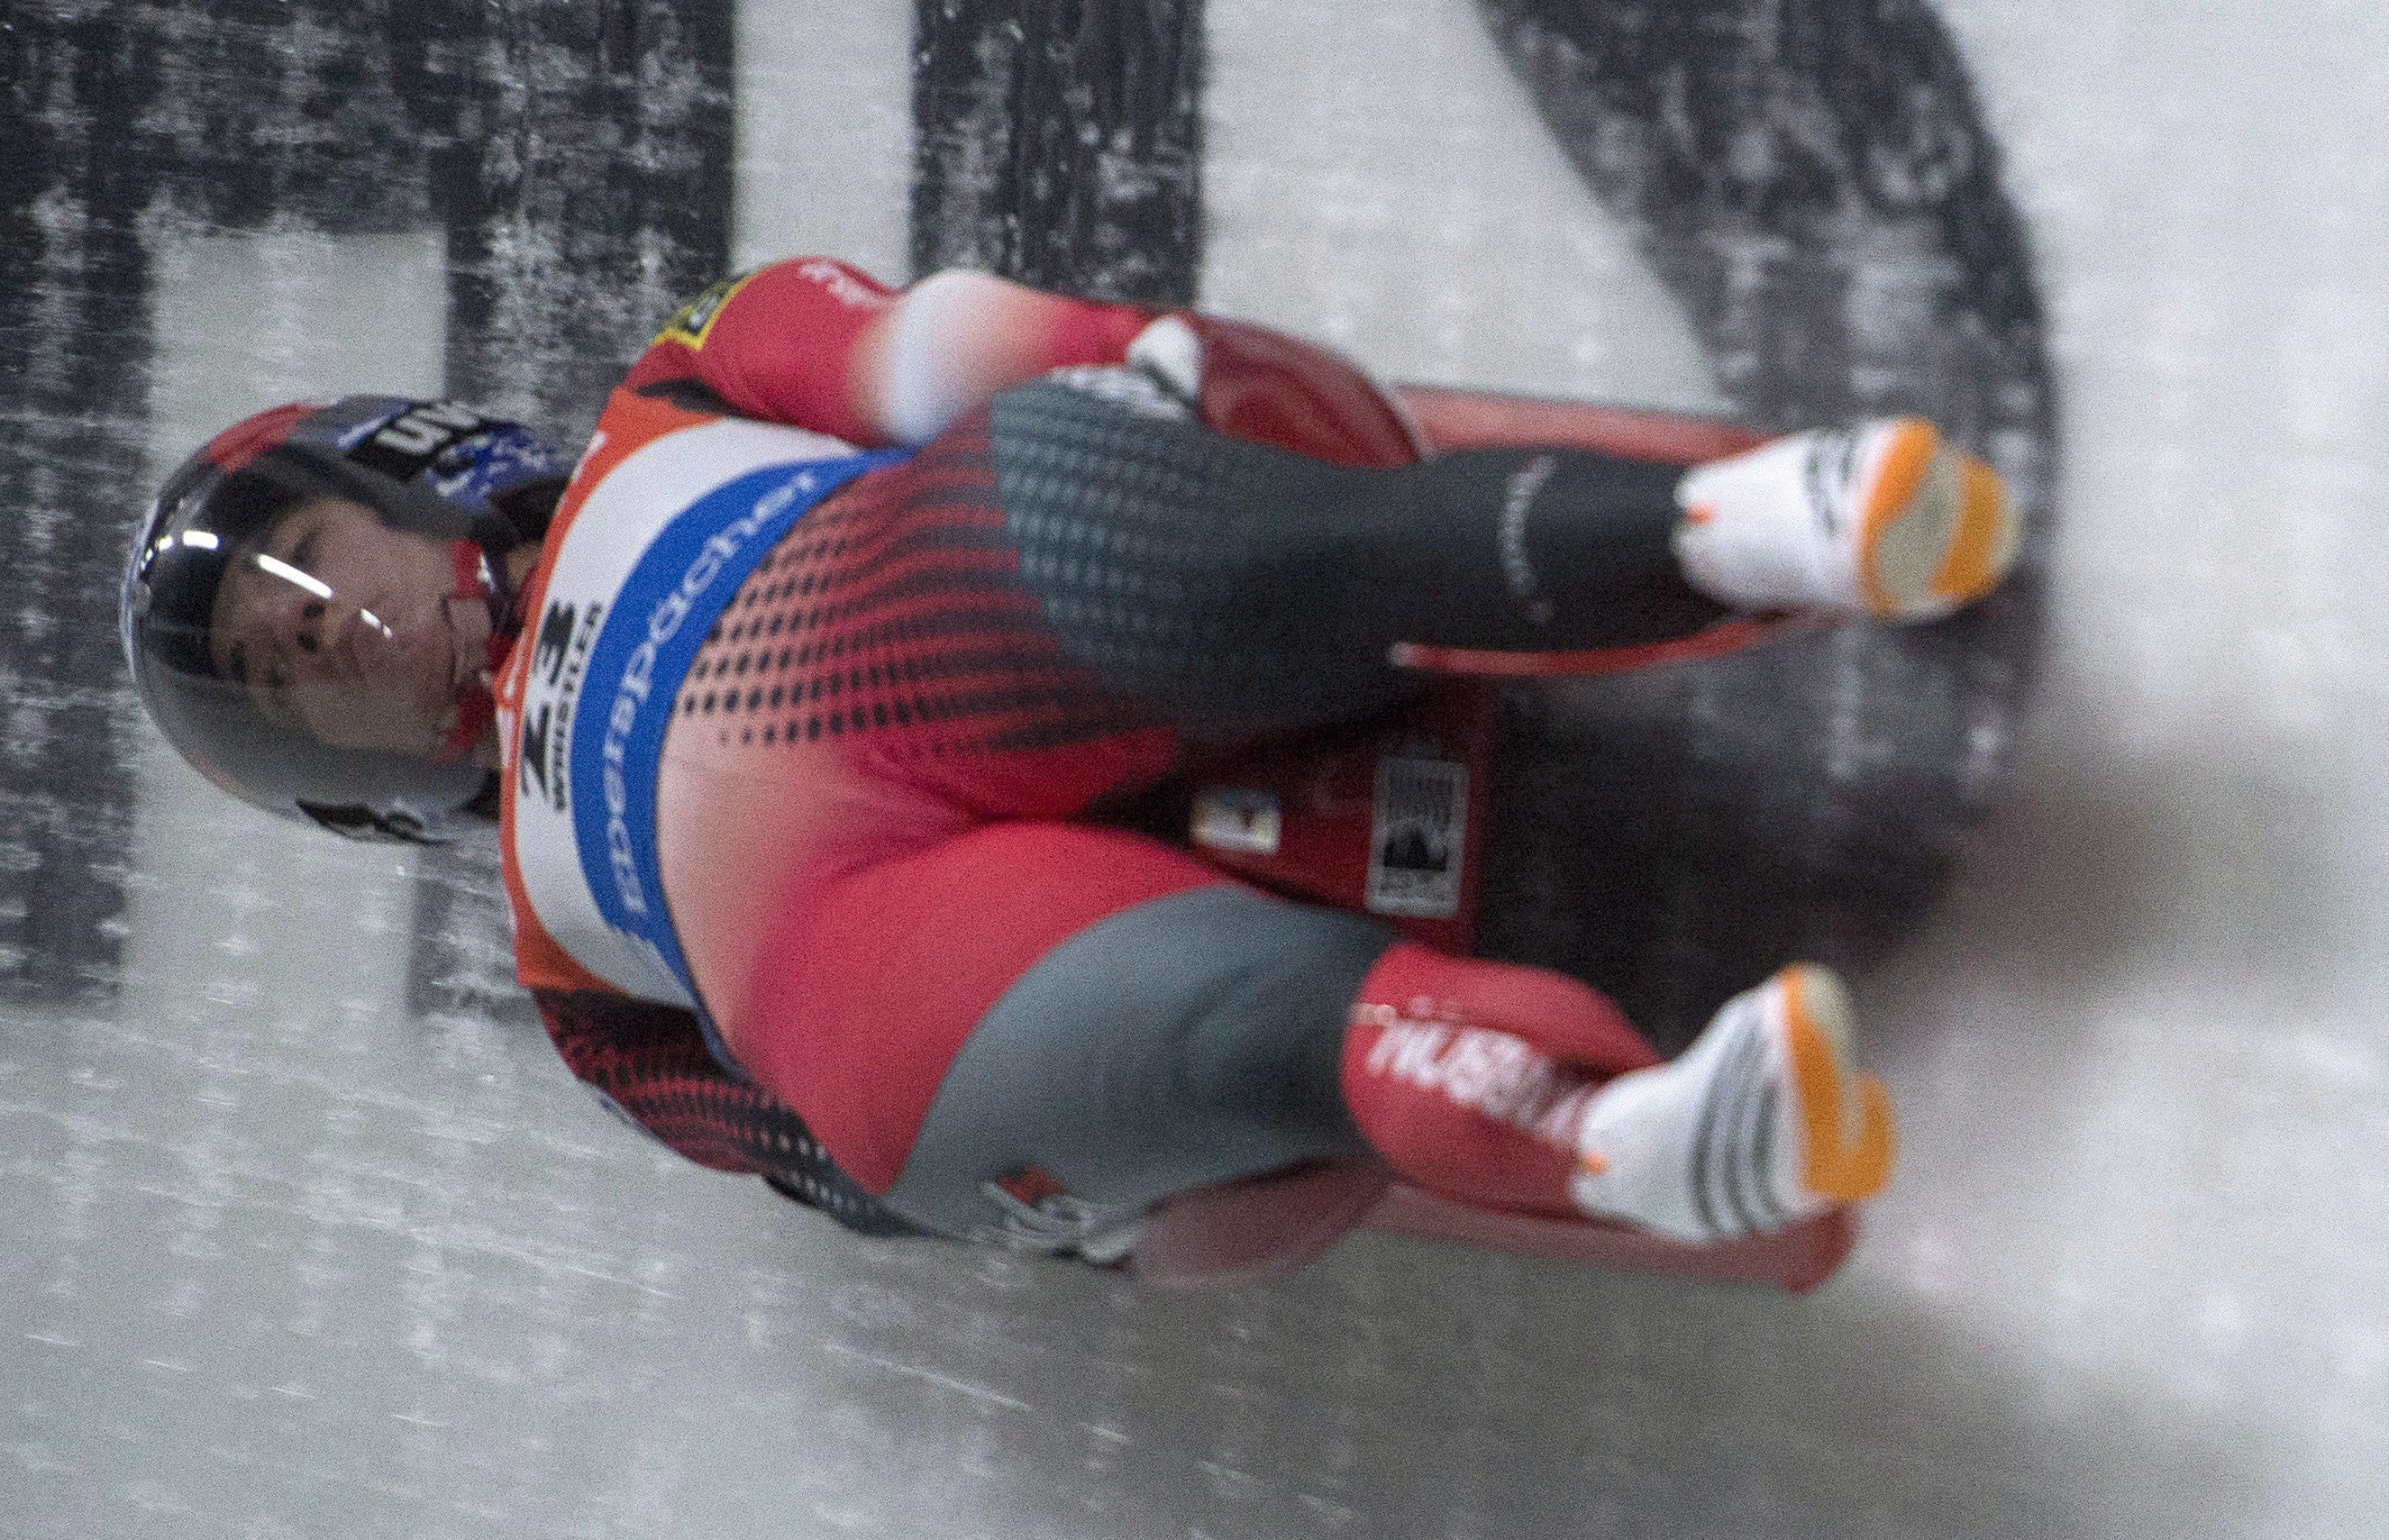 Kimberley McRae of Canada slides during the women's Luge World Cup in Whistler, B.C. Saturday, Dec. 10, 2016. THE CANADIAN PRESS/Jonathan Hayward